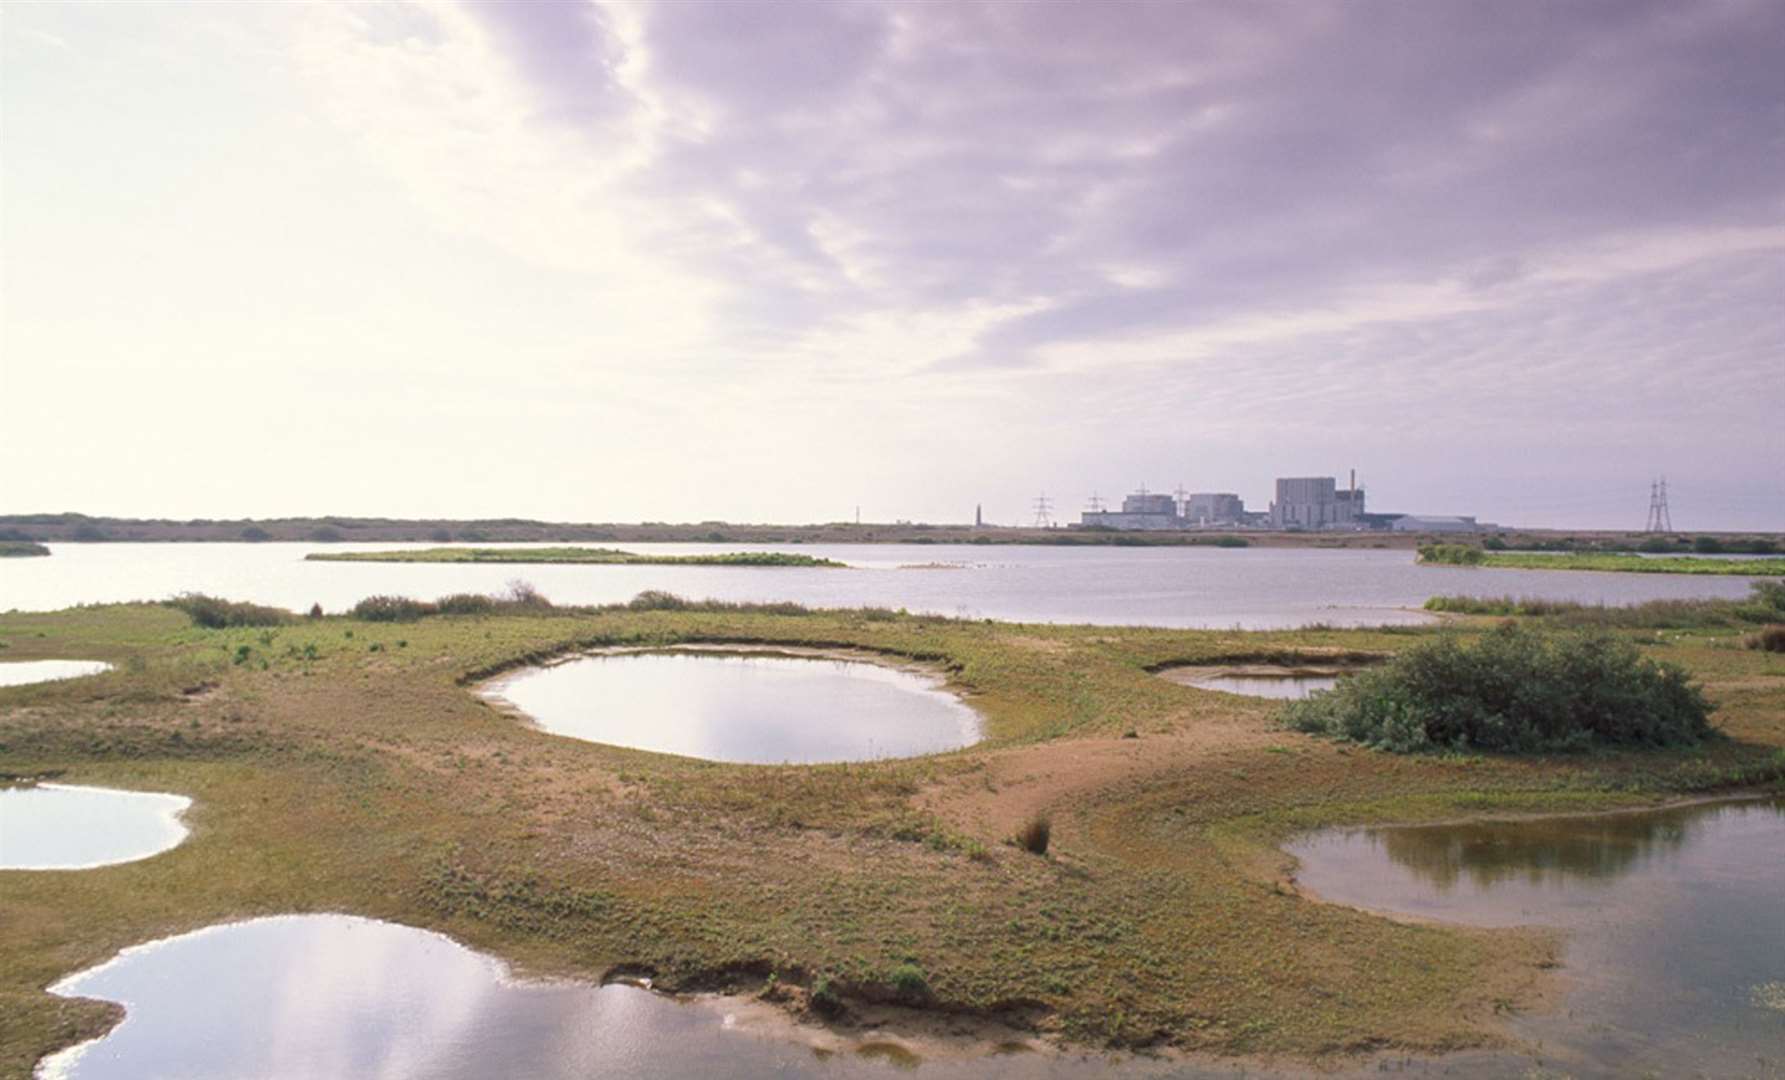 Birds fly across ponds on the edge of Burrowes Pit, with Dungeness in the background